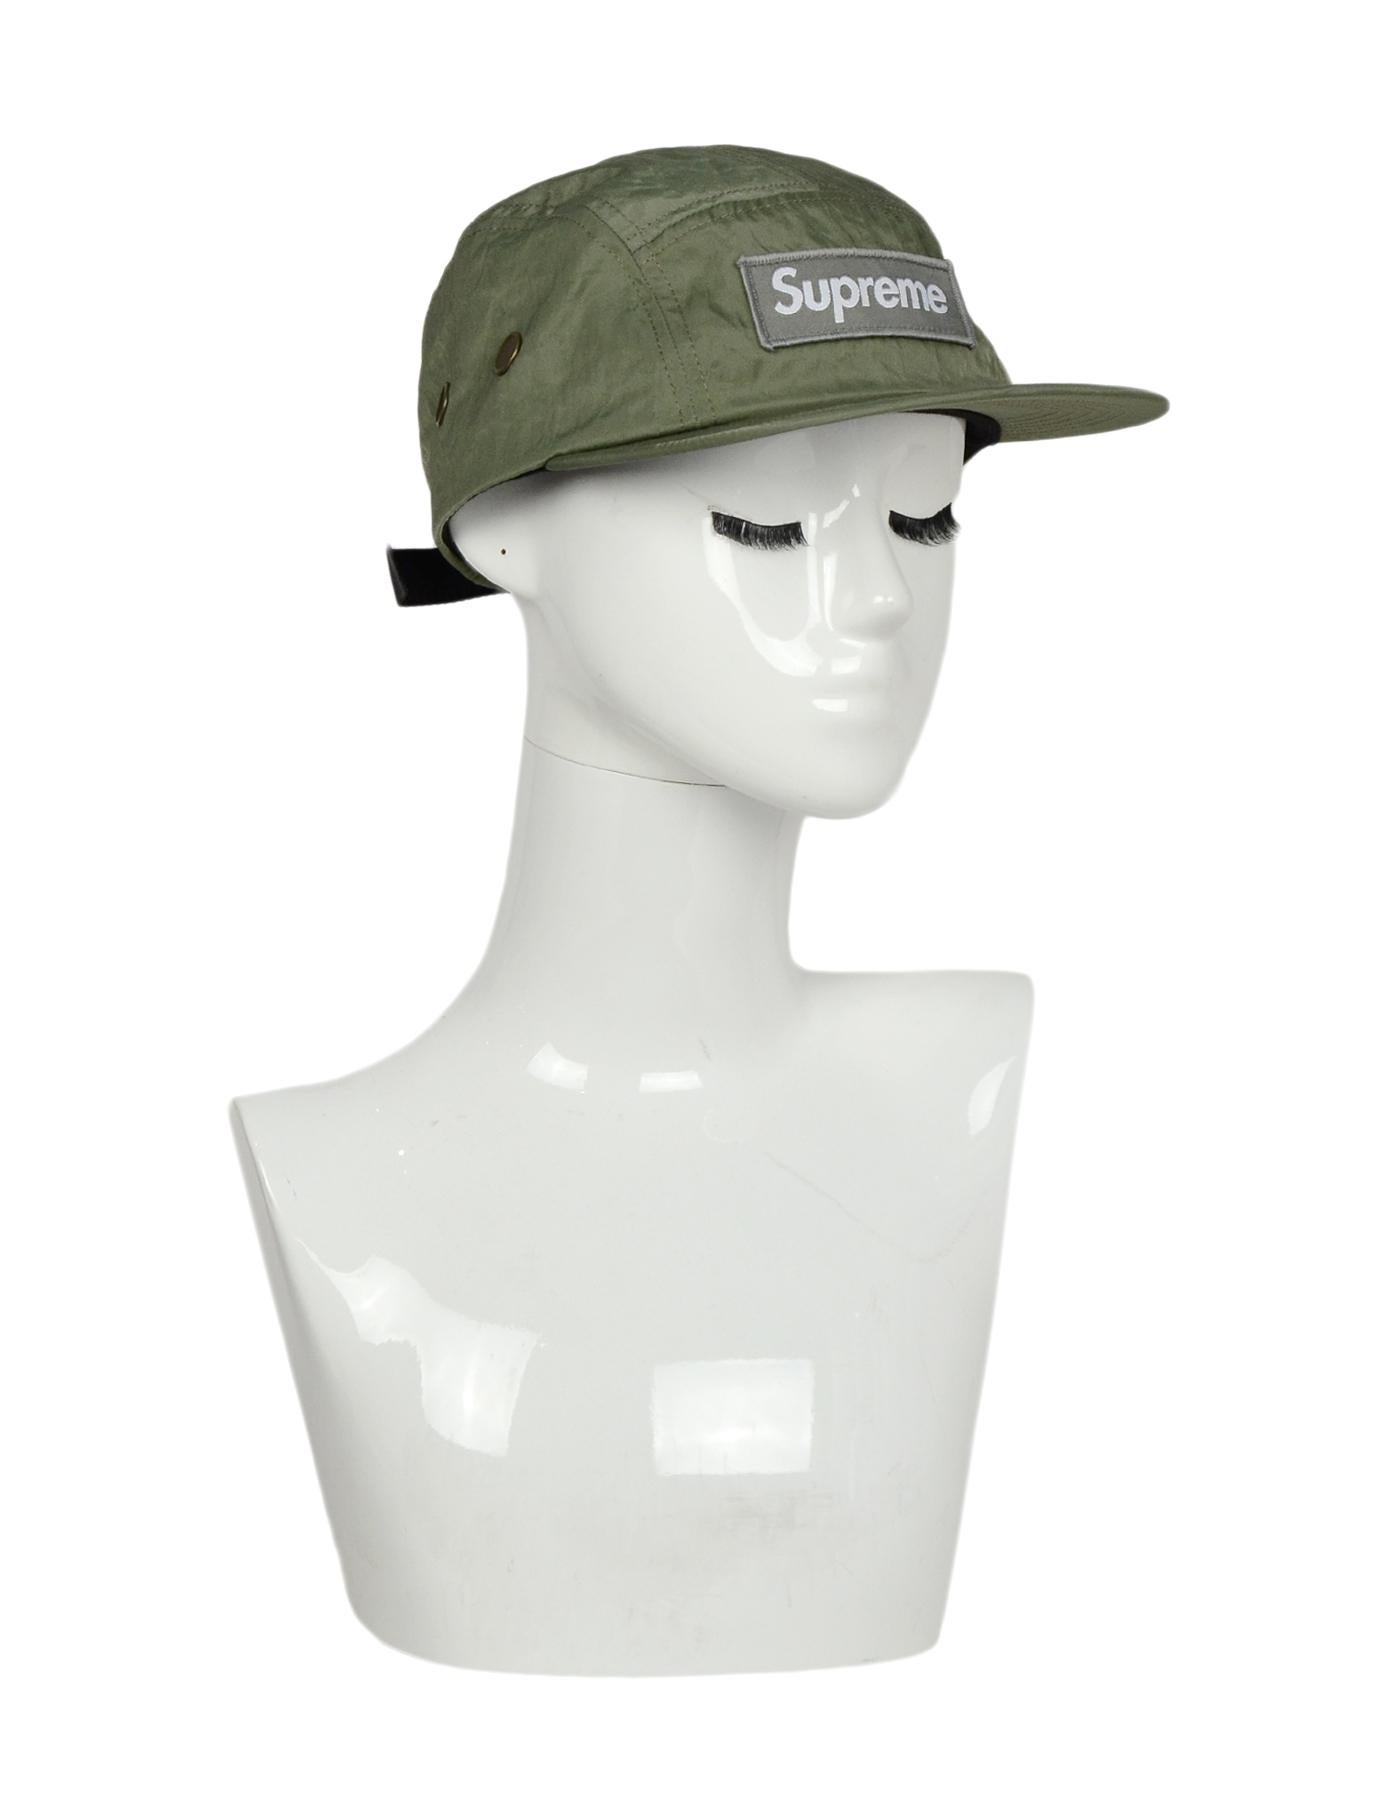 Supreme Green Logo Camp Hat

Made In: USA
Color: Olive green 
Materials: Nylon
Opening/Closure: Pull on with adjustable strap
Overall Condition: Excellent pre-owned condition
Measurements 
7.5